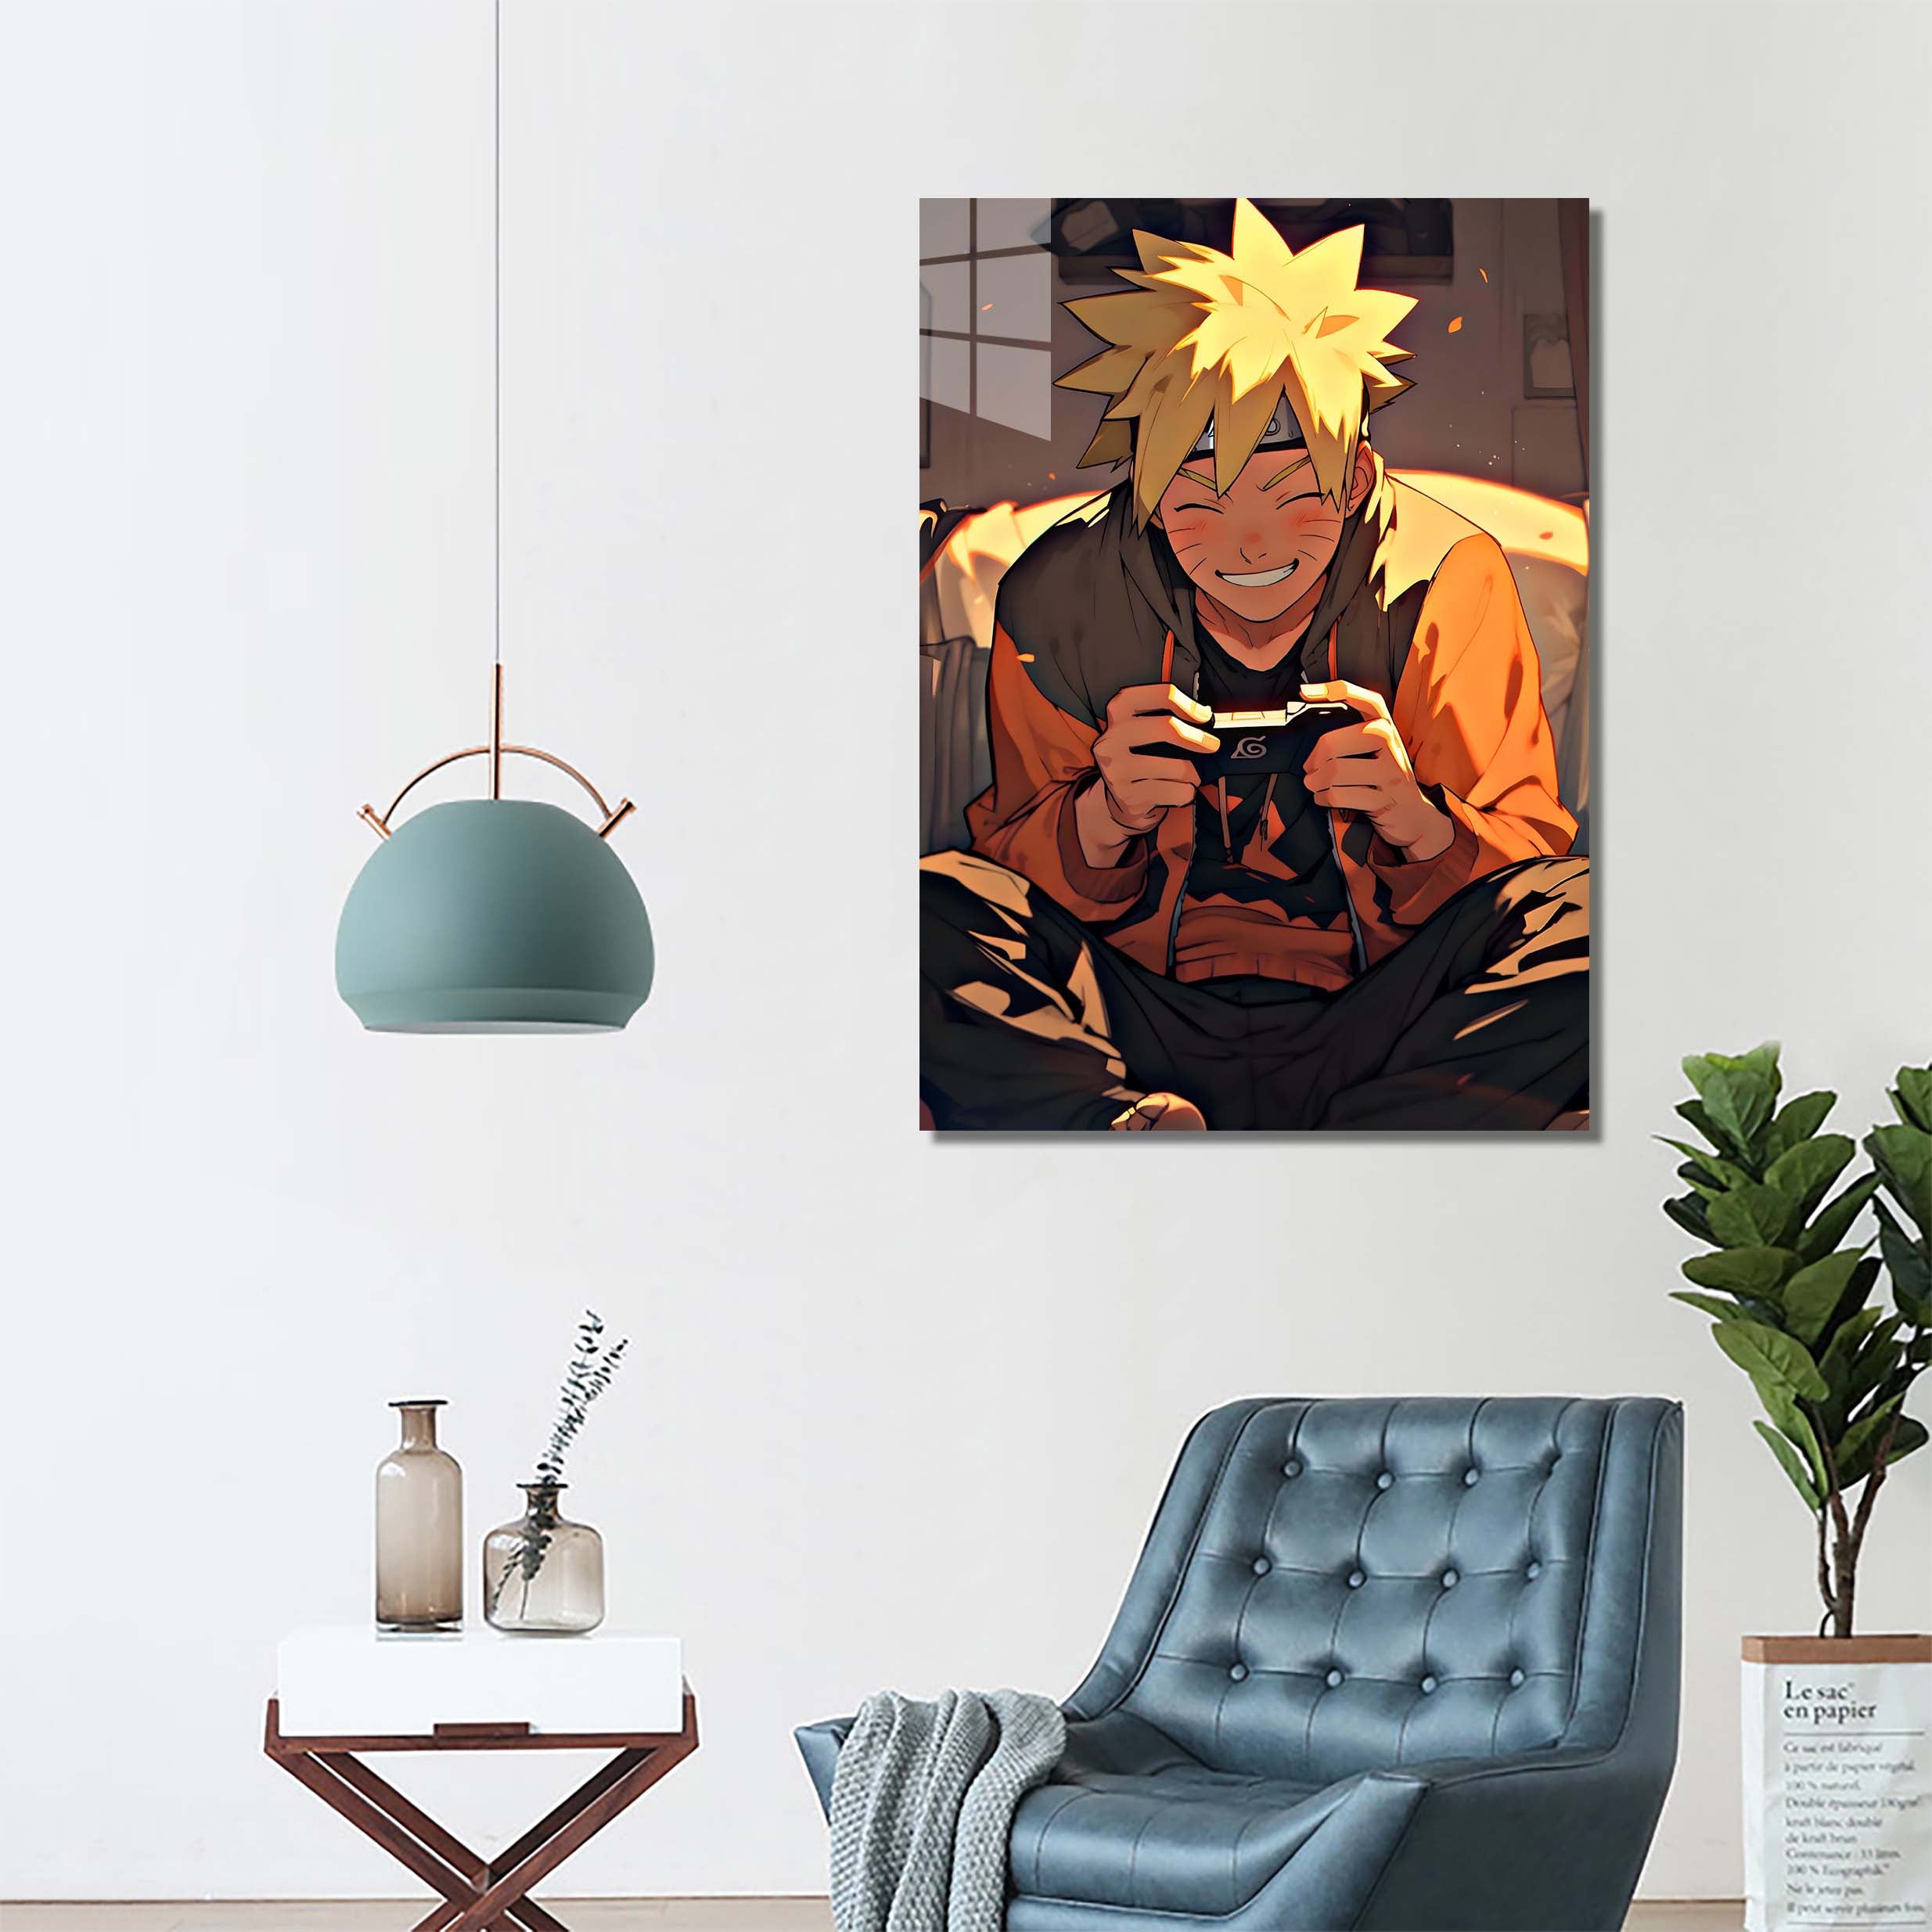 naruto uzumaki playing games in room-designed by @Vid_M@tion